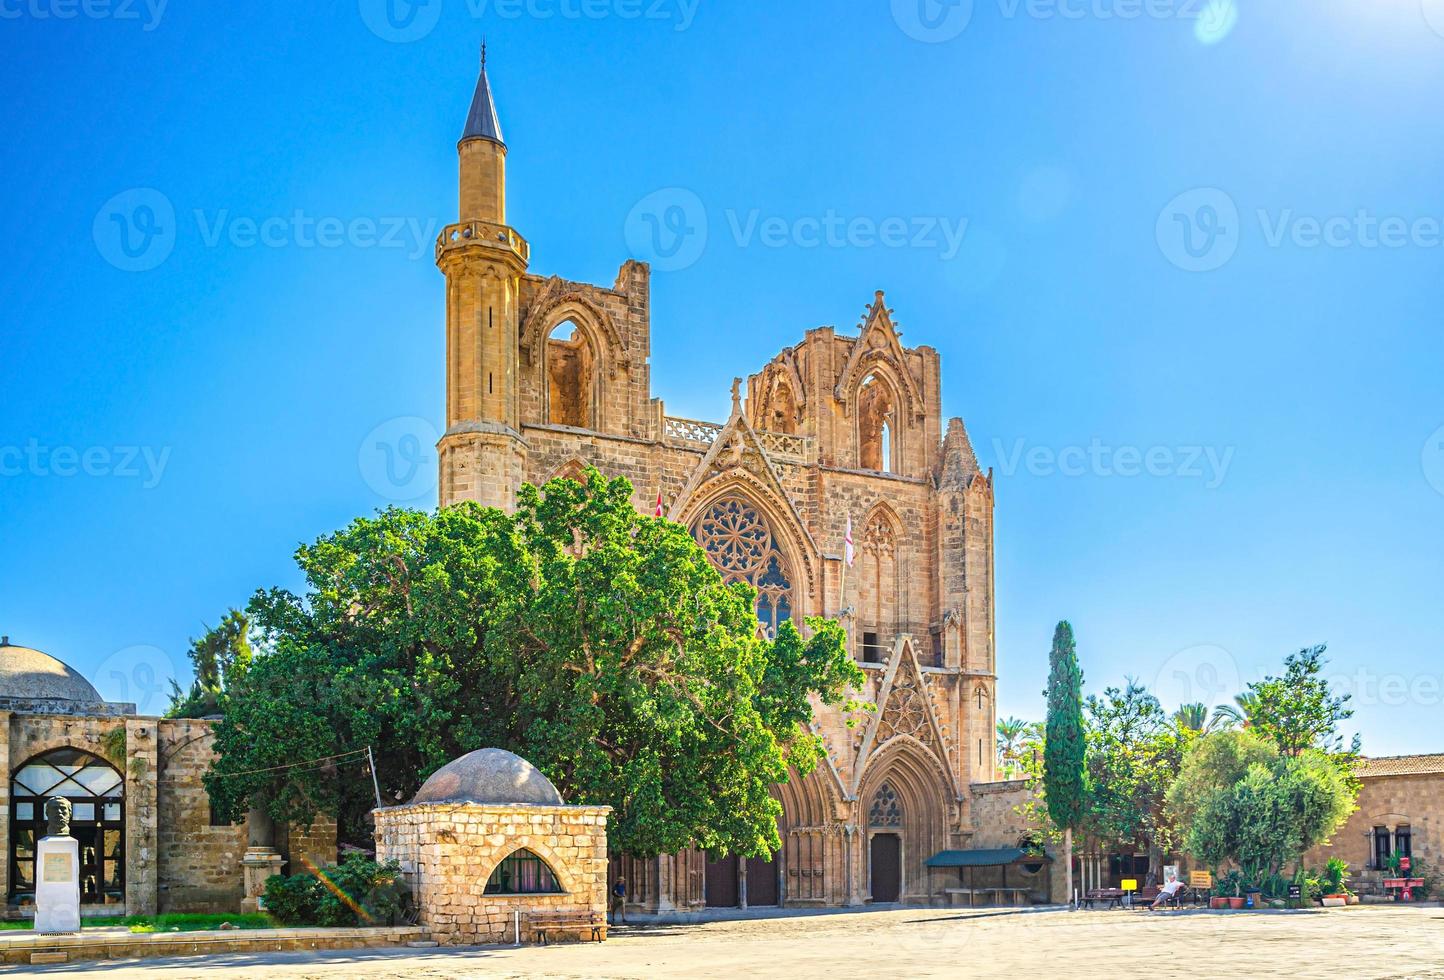 Lala Mustafa Pasha Camii Mosque or Old Cathedral of Saint Nicholas medieval building with minaret in Famagusta photo